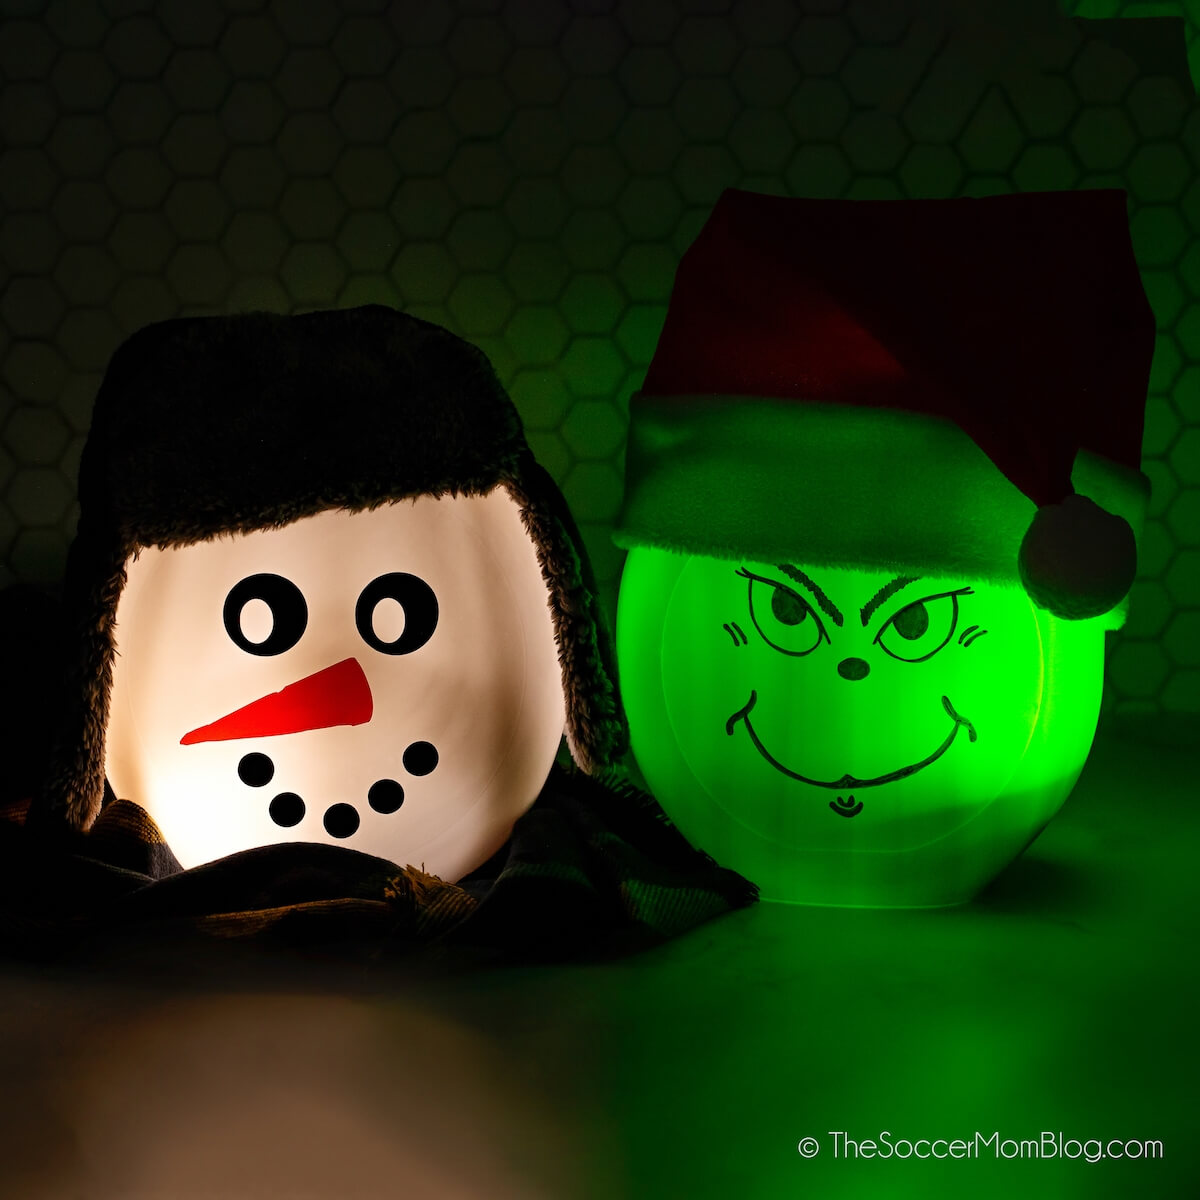 Grinch and snowman Christmas lanterns made from laundry pod containers, illuminated in dark